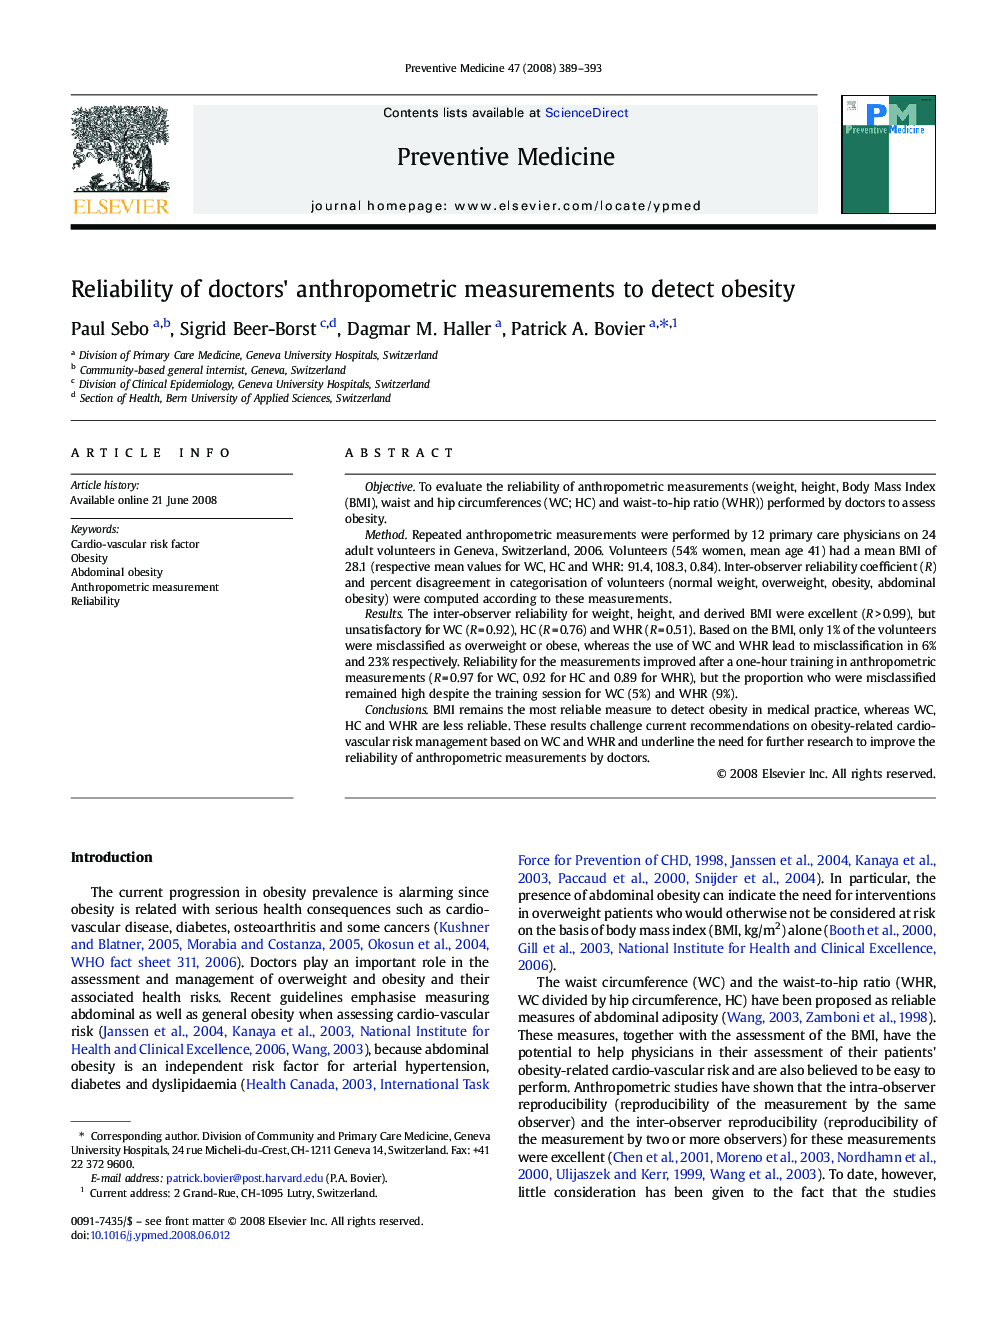 Reliability of doctors' anthropometric measurements to detect obesity